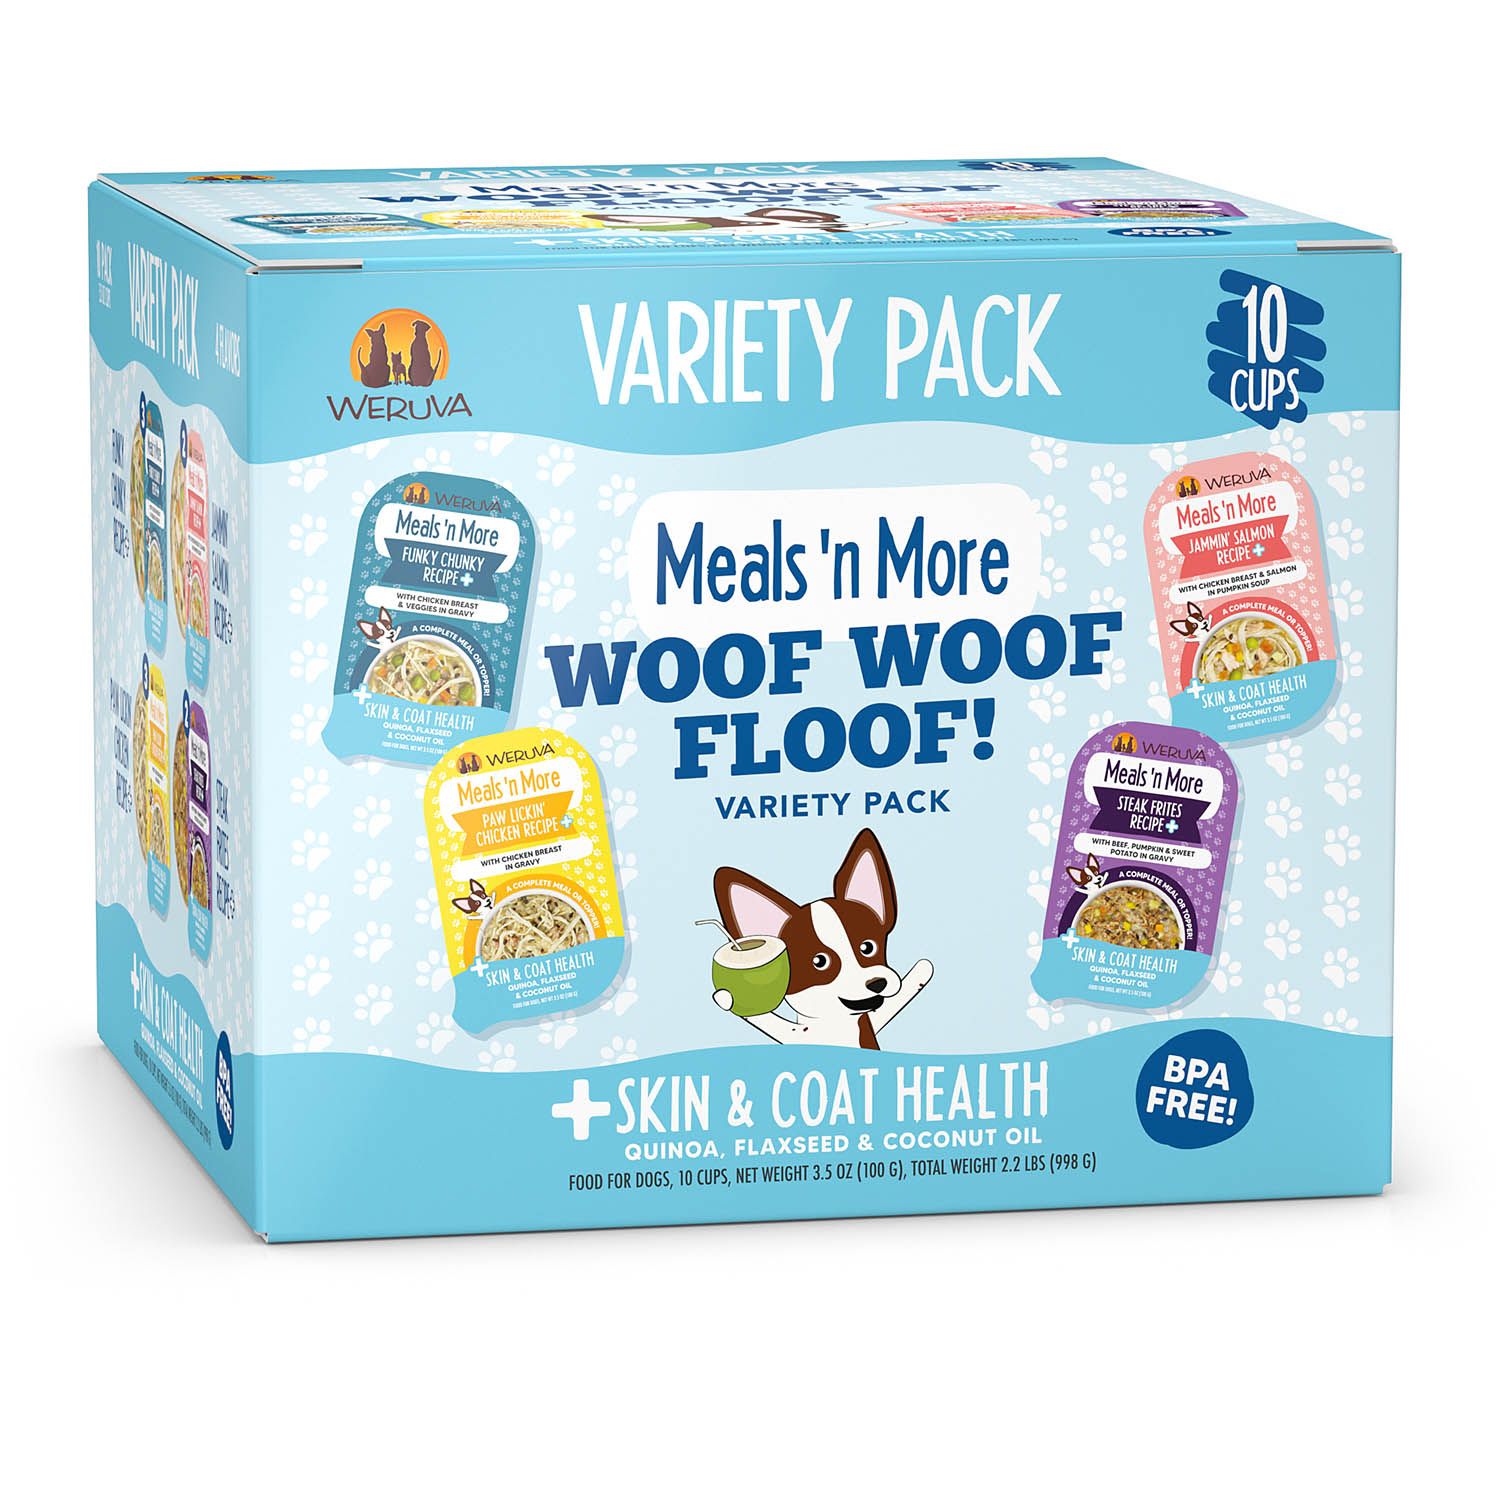 Variety Pack - Meals n More - Woof Woof Floof! - Dog